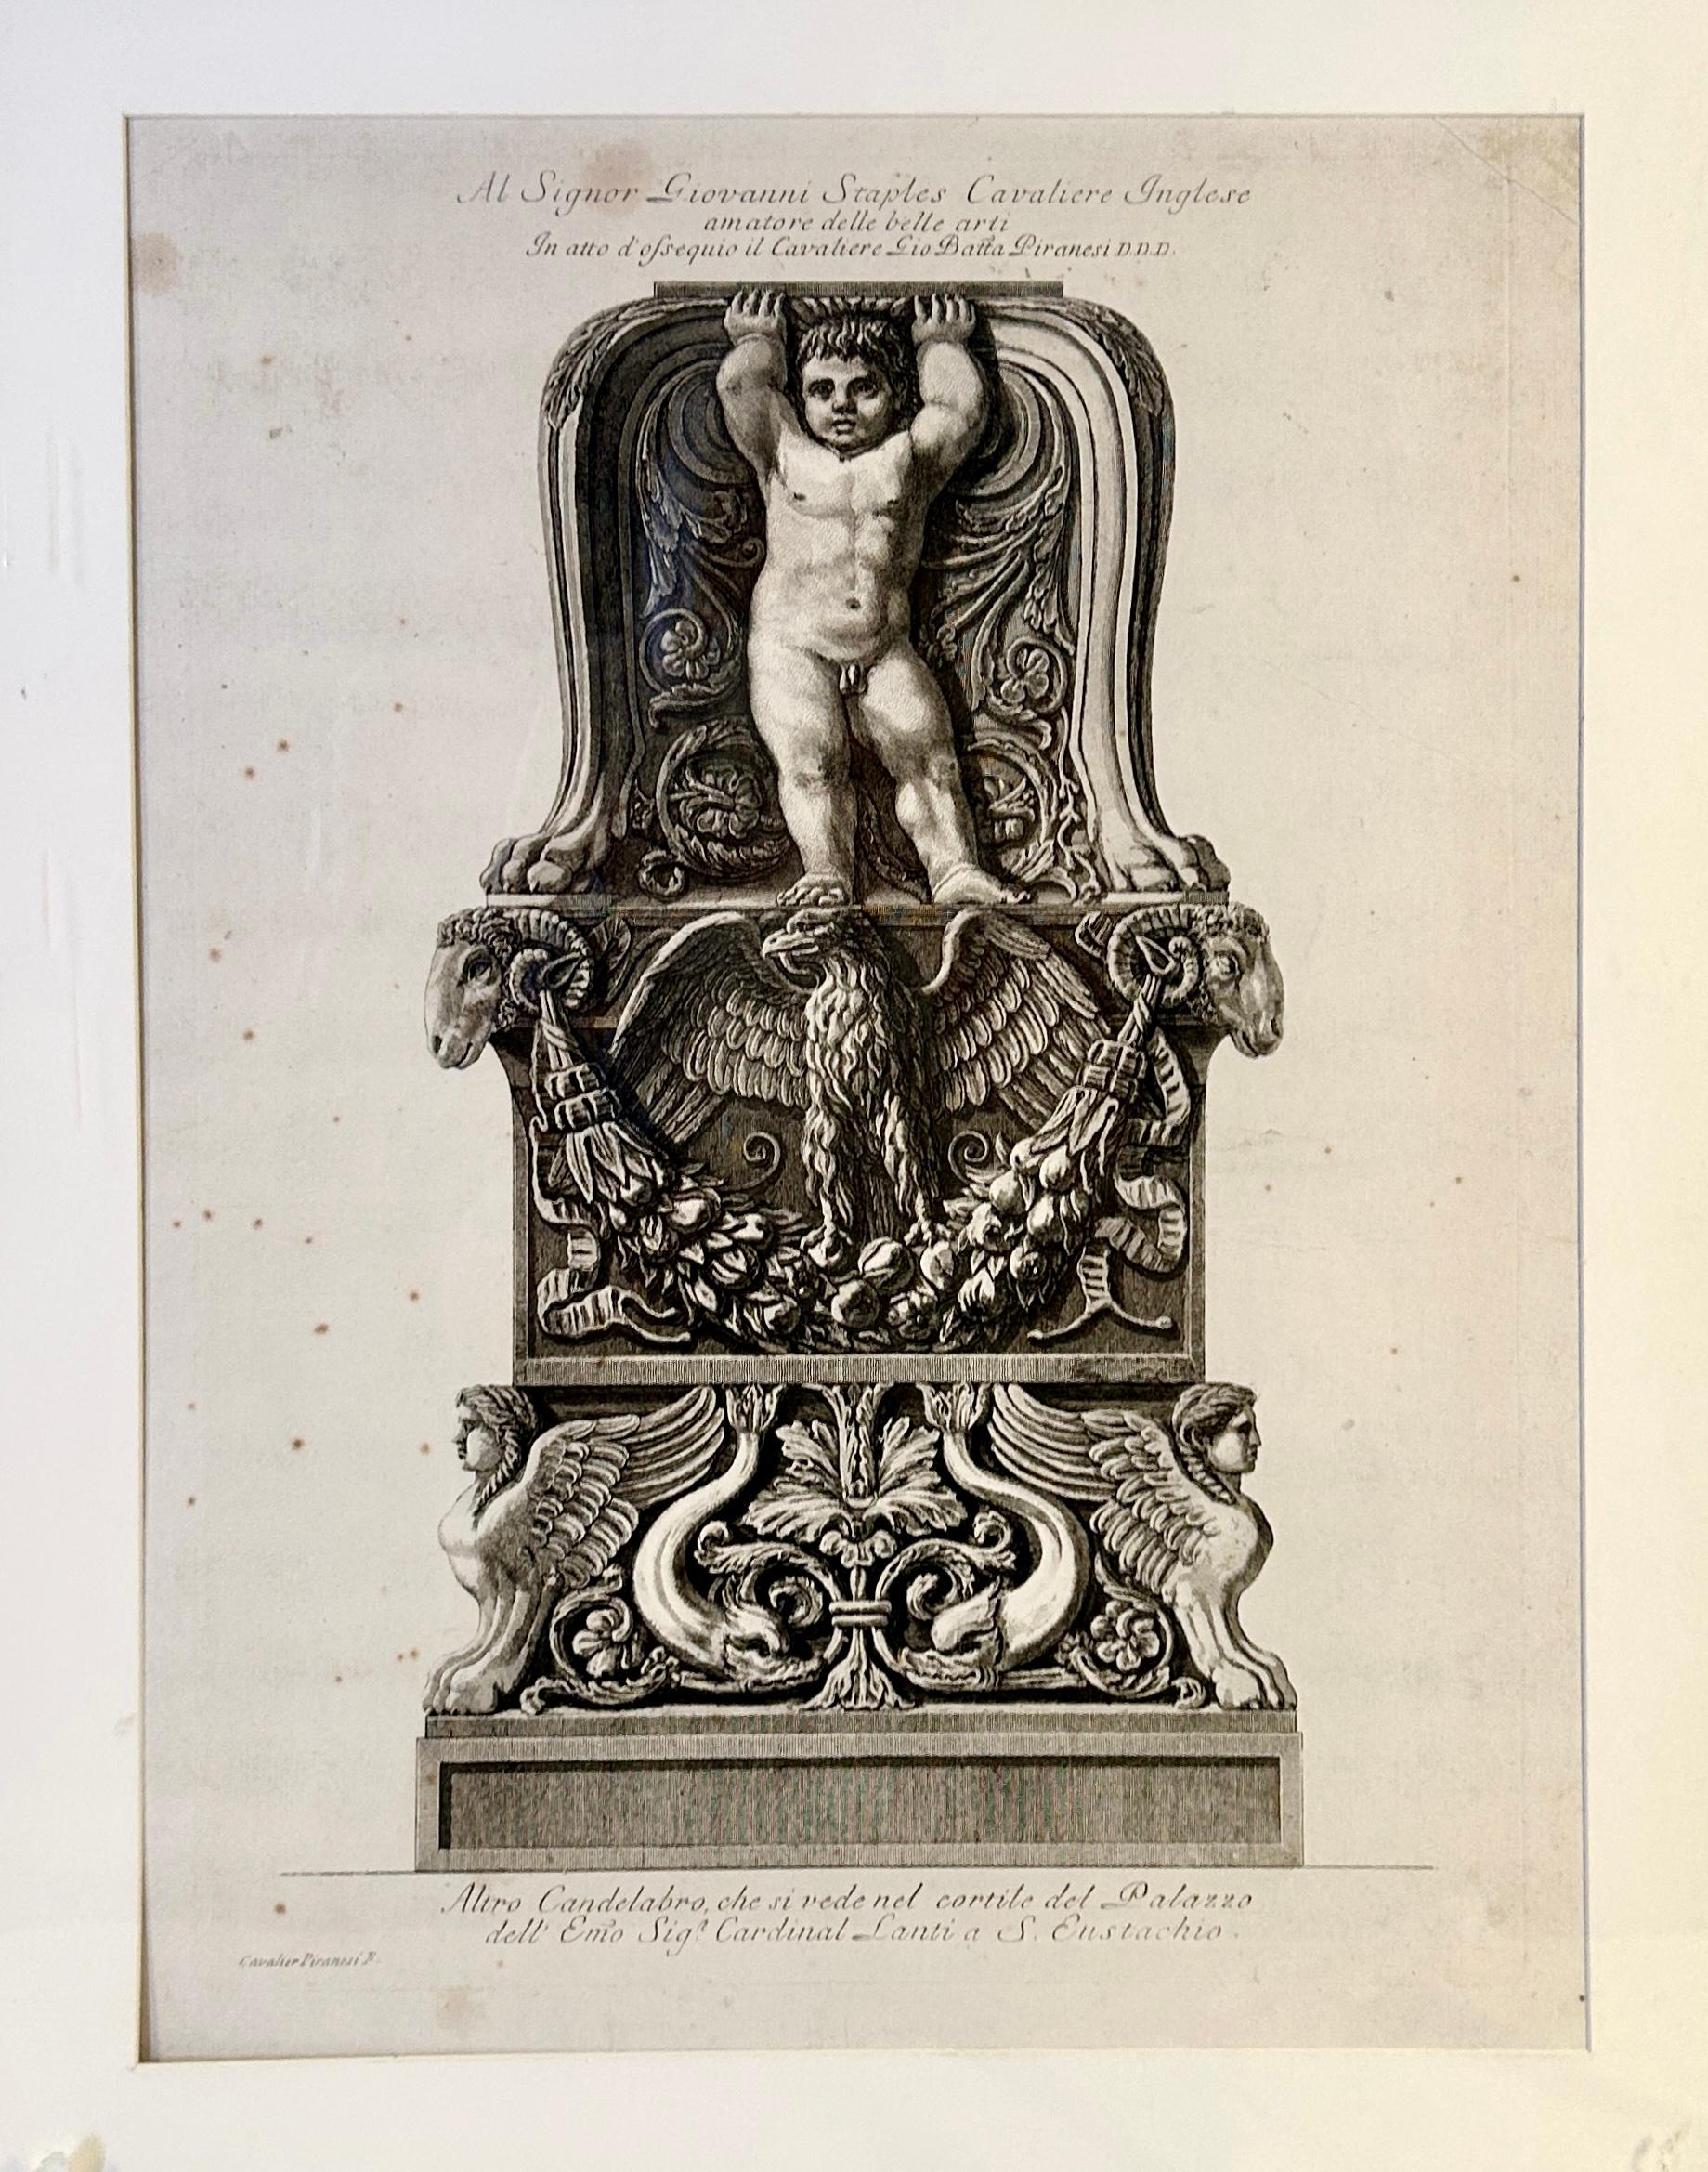 Framed etching of ornamental candelabrum base found in the courtyard of a church in Italy (Sant' Eustachio). Engraving by Italian artist Giovanni Piranesi (1720-1778).  Black and white with off white matting, under glass and framed.